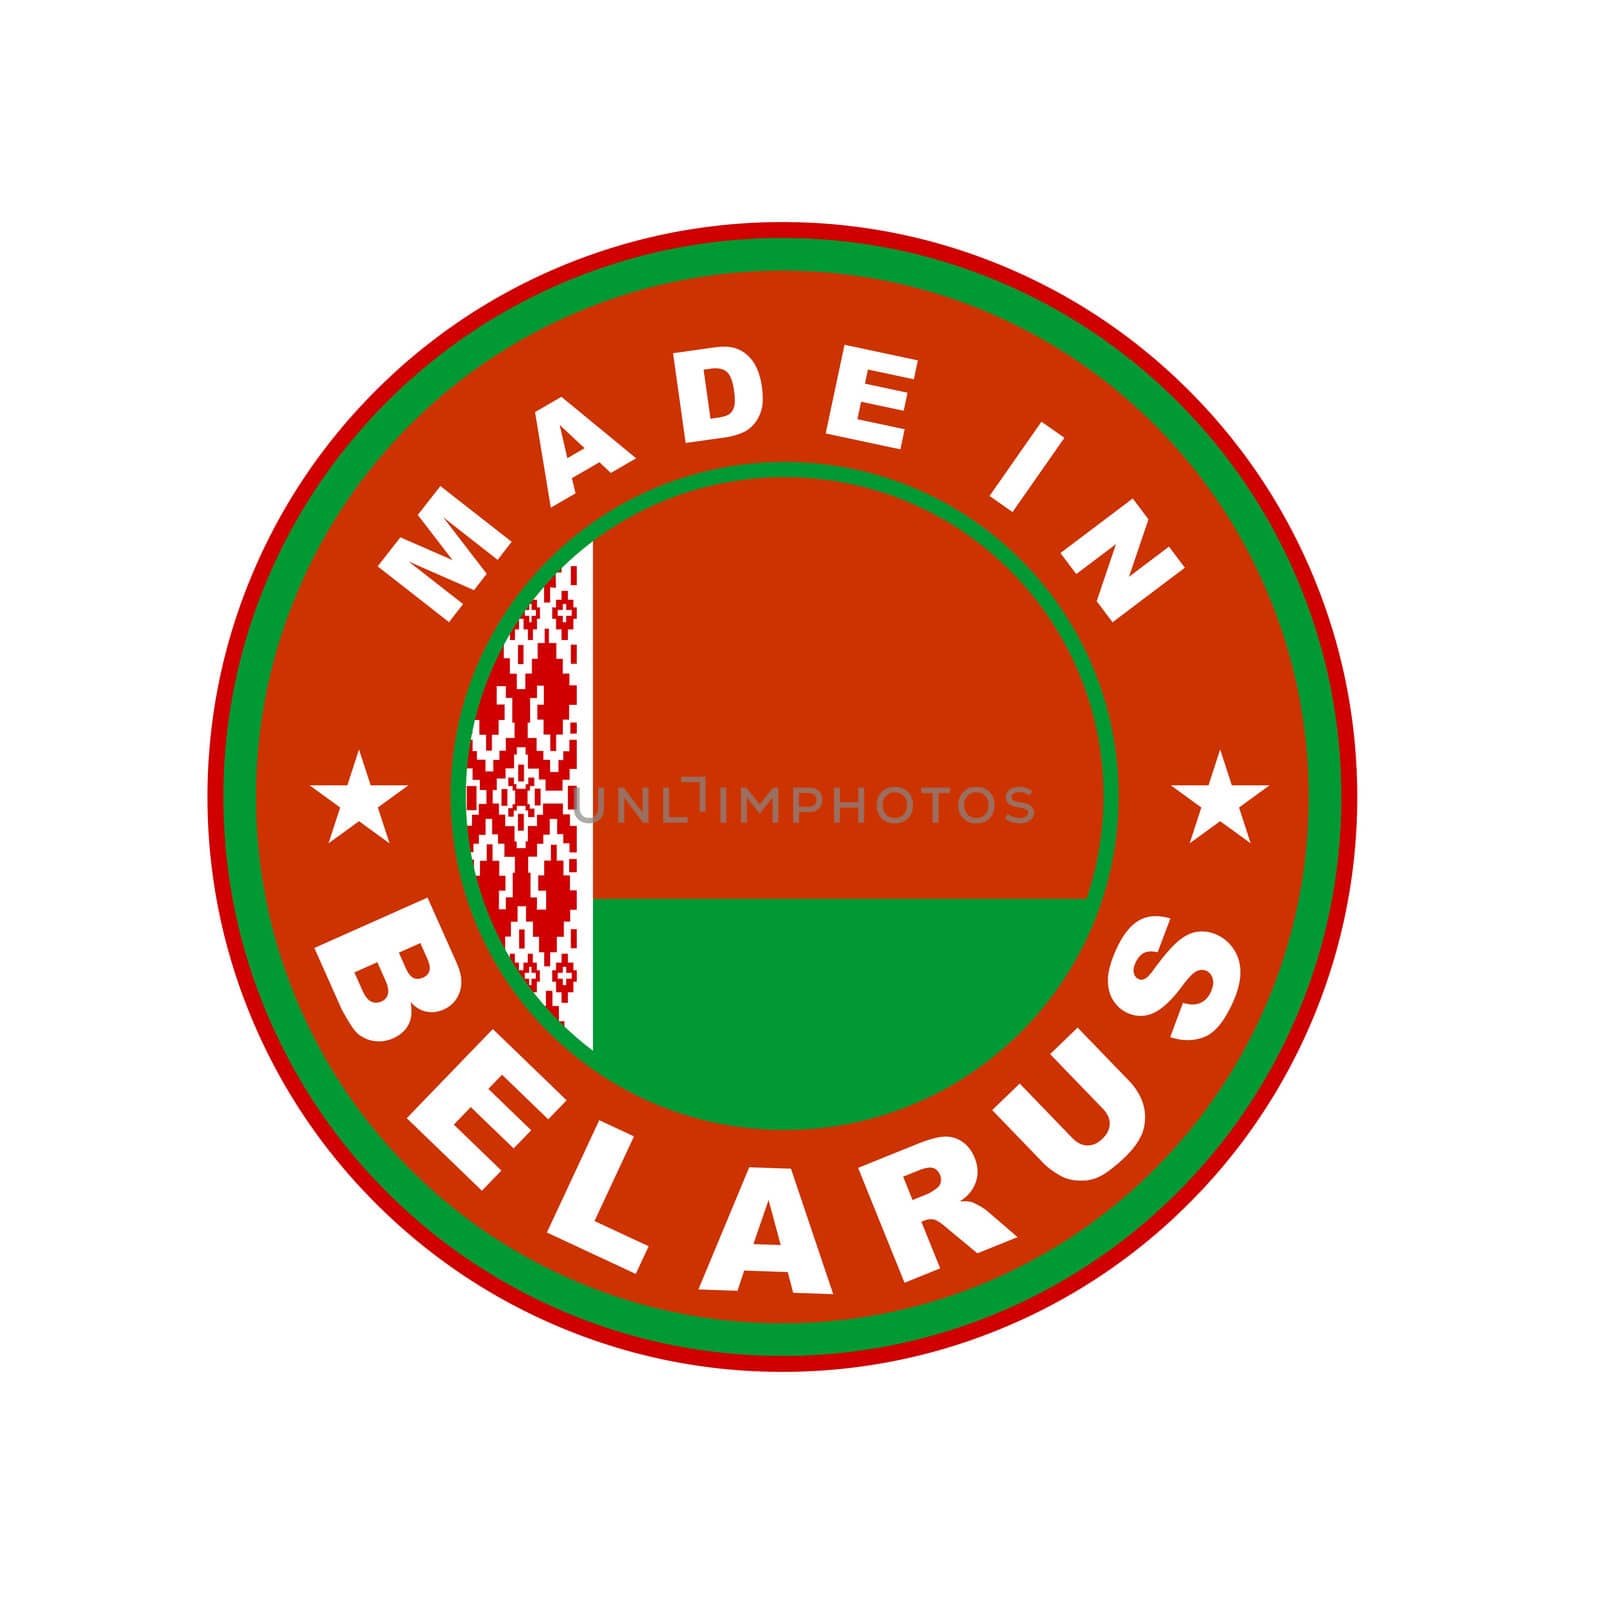 very big size made in belarus country label